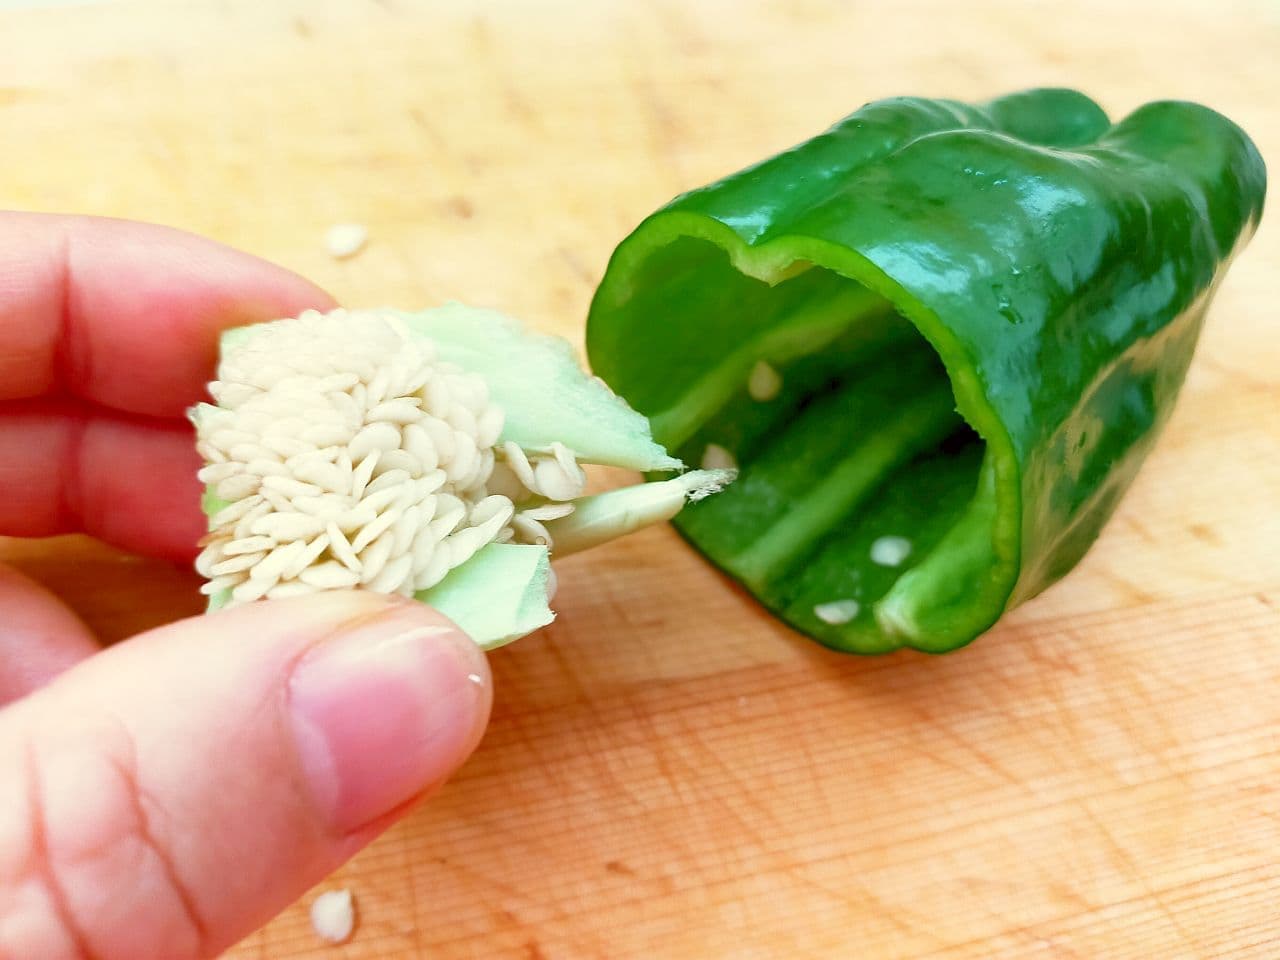 How to remove seeds from bell peppers